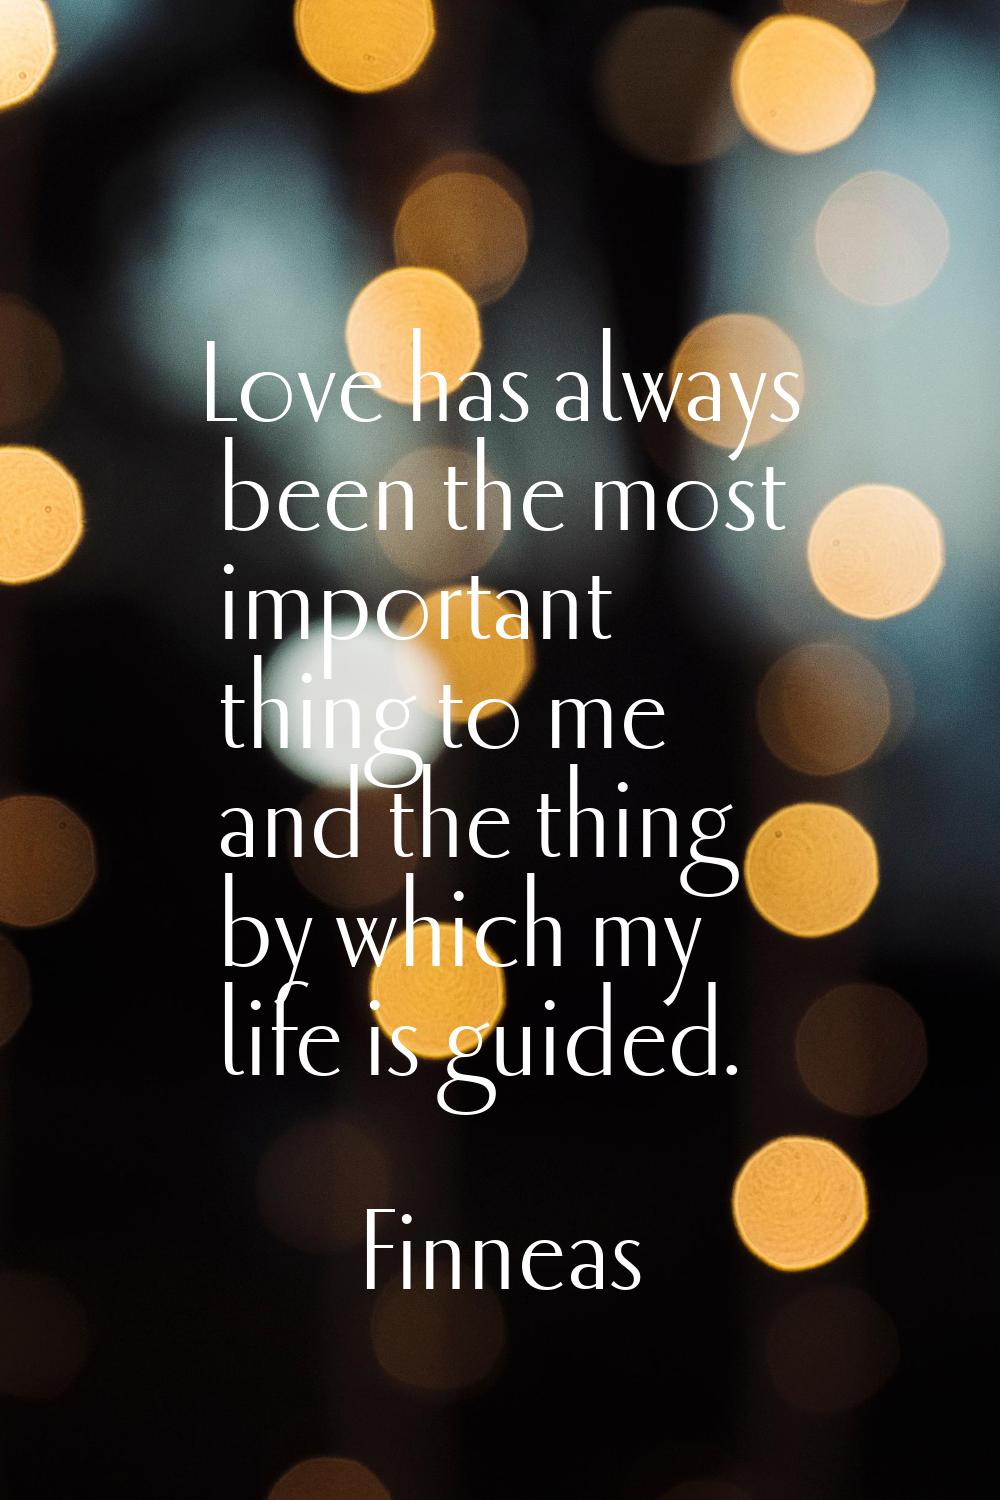 Love has always been the most important thing to me and the thing by which my life is guided.